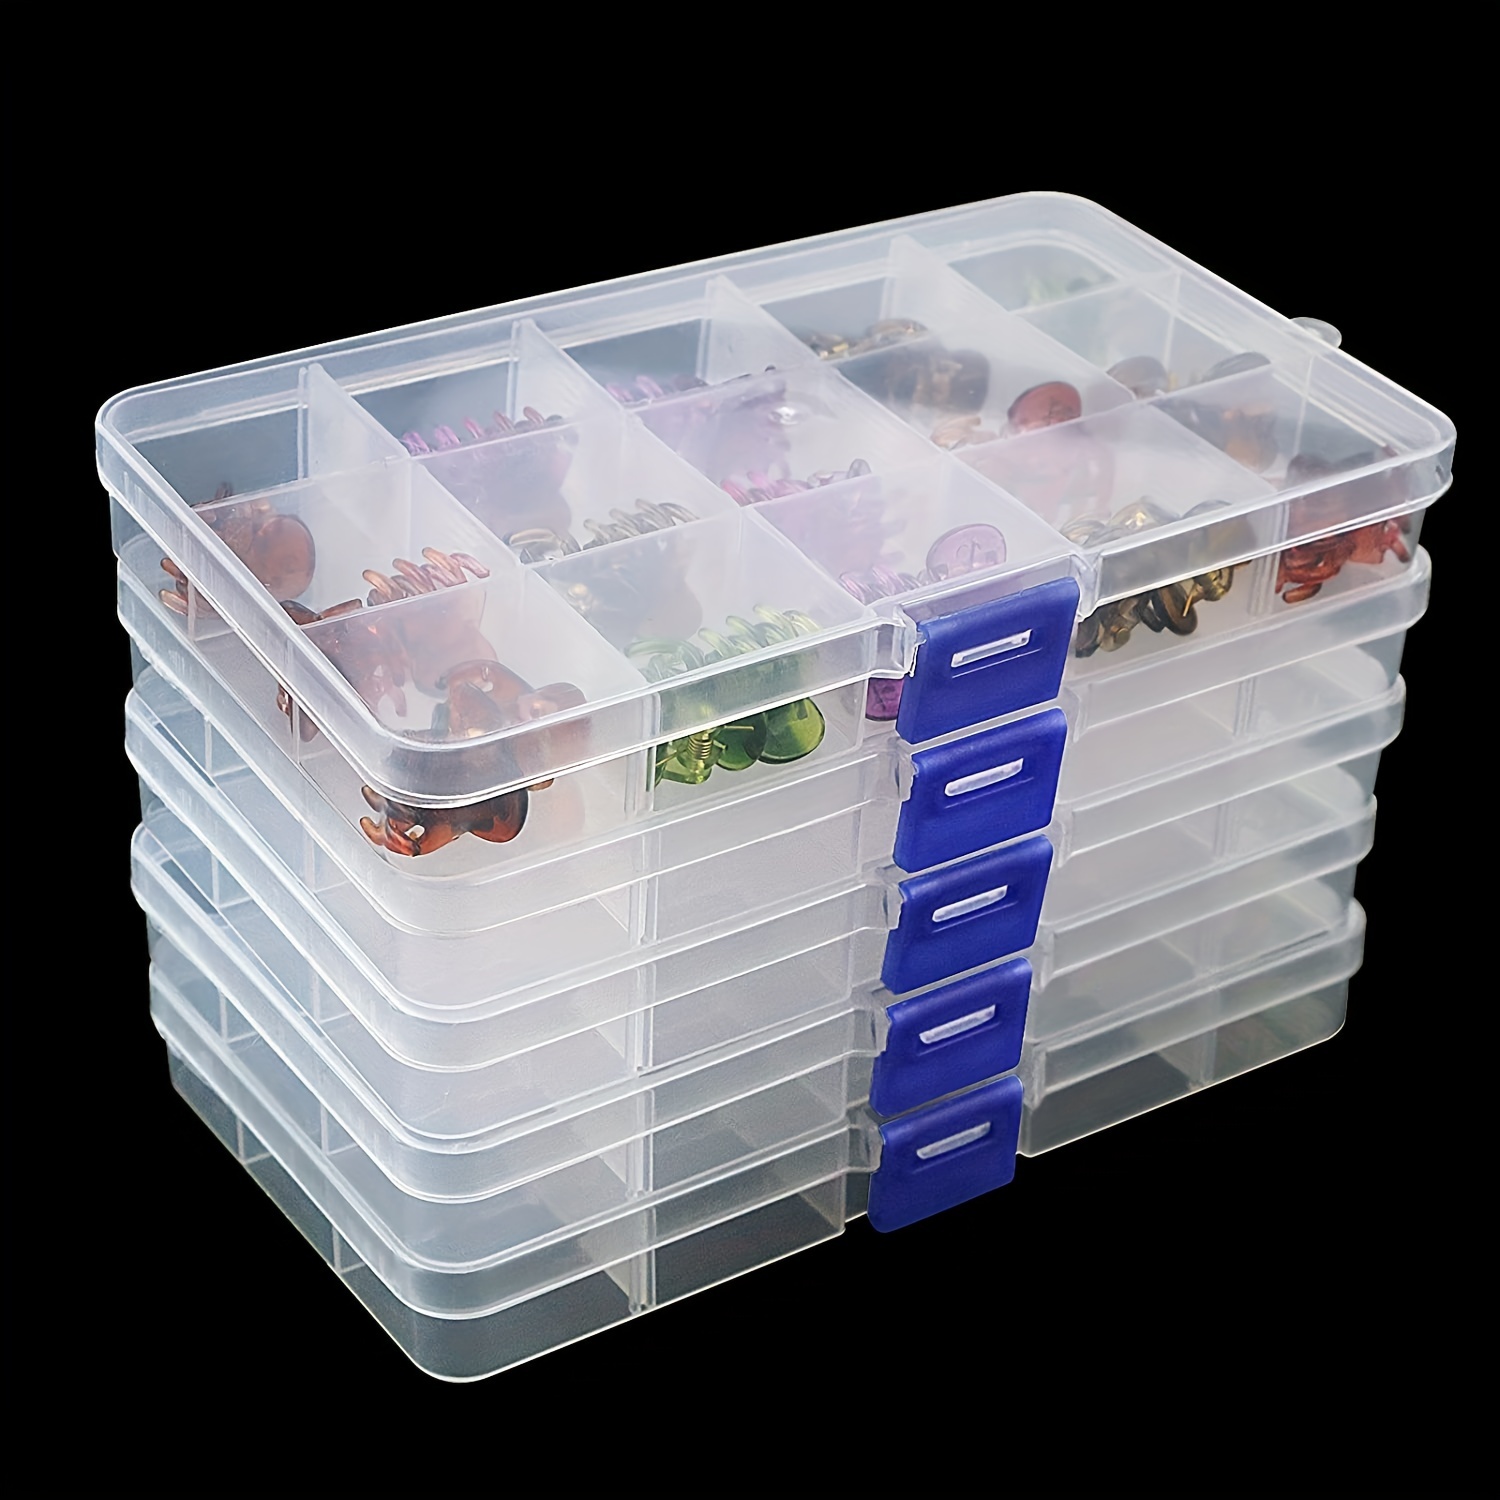 PandaHall Elite Size 30x16mm Round Clear Plastic Containers for Beads Small  Items Craft Findings Storage, about 40pcs/box 